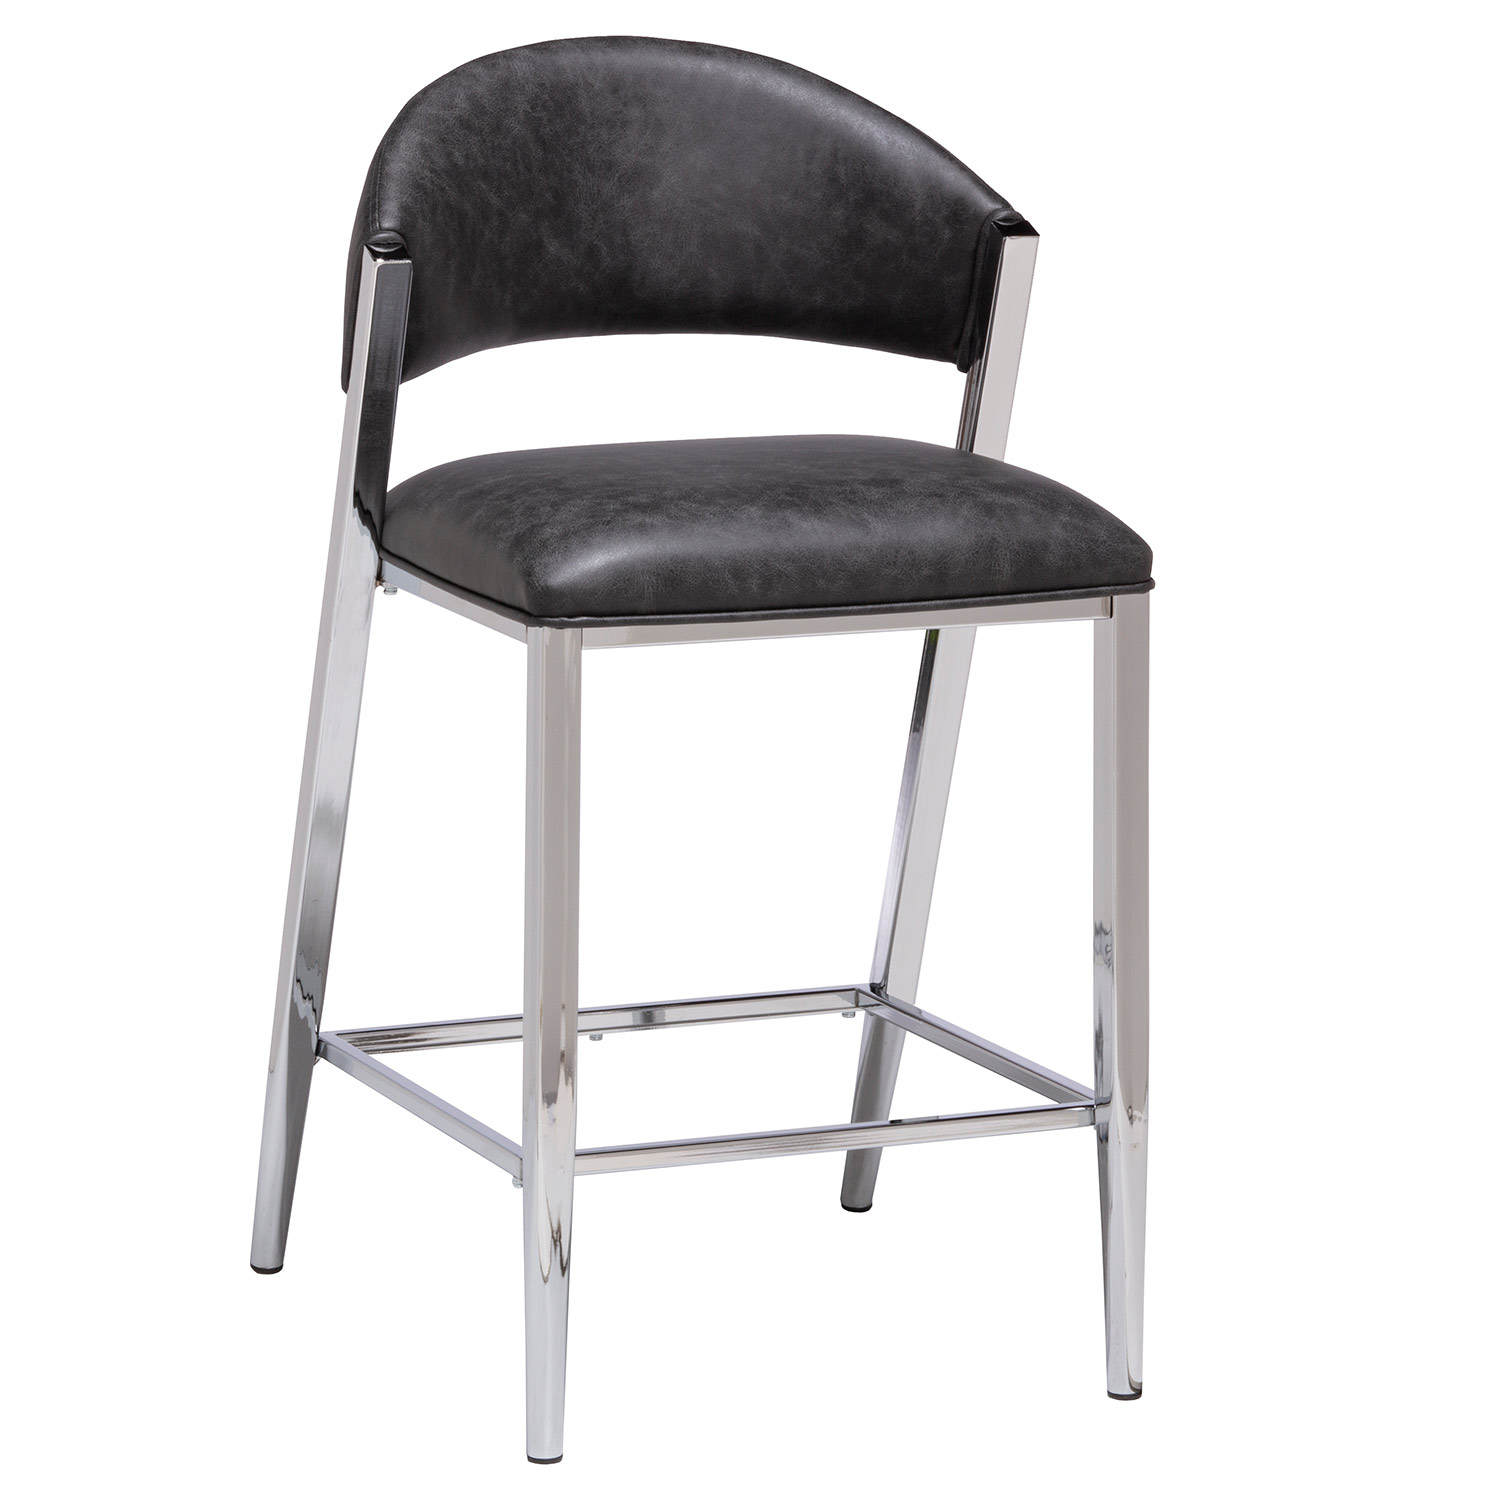 Hillsdale Molina Counter Height Stool - Chrome